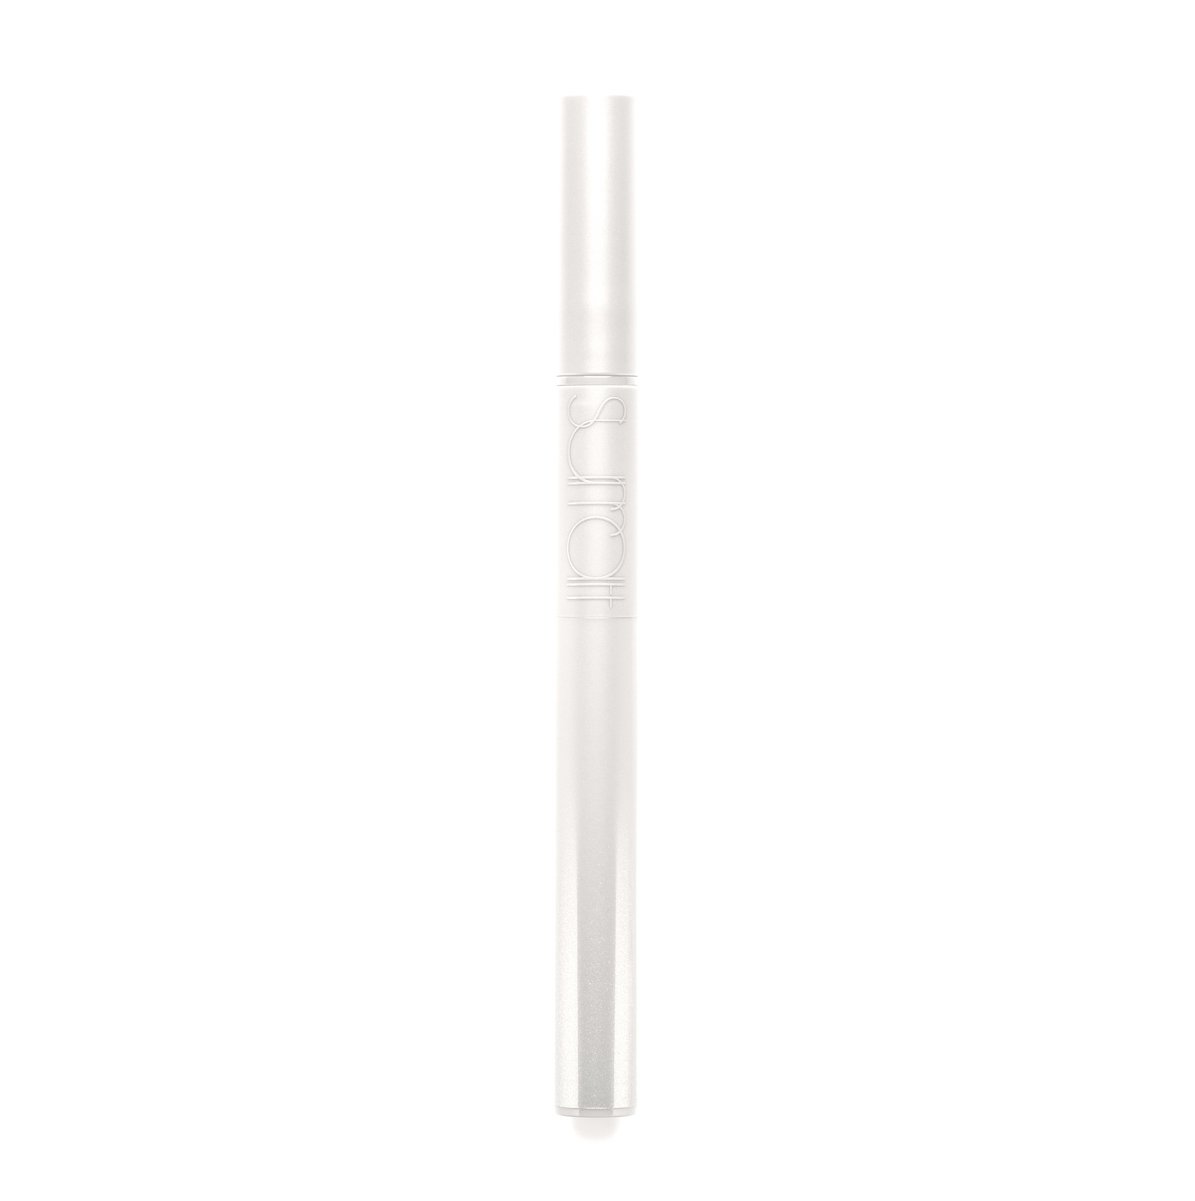 PERLE - White and Scintillating Sparkle - eye brightening dual-ended pencil with color correcting waterline liner and shimmer powder